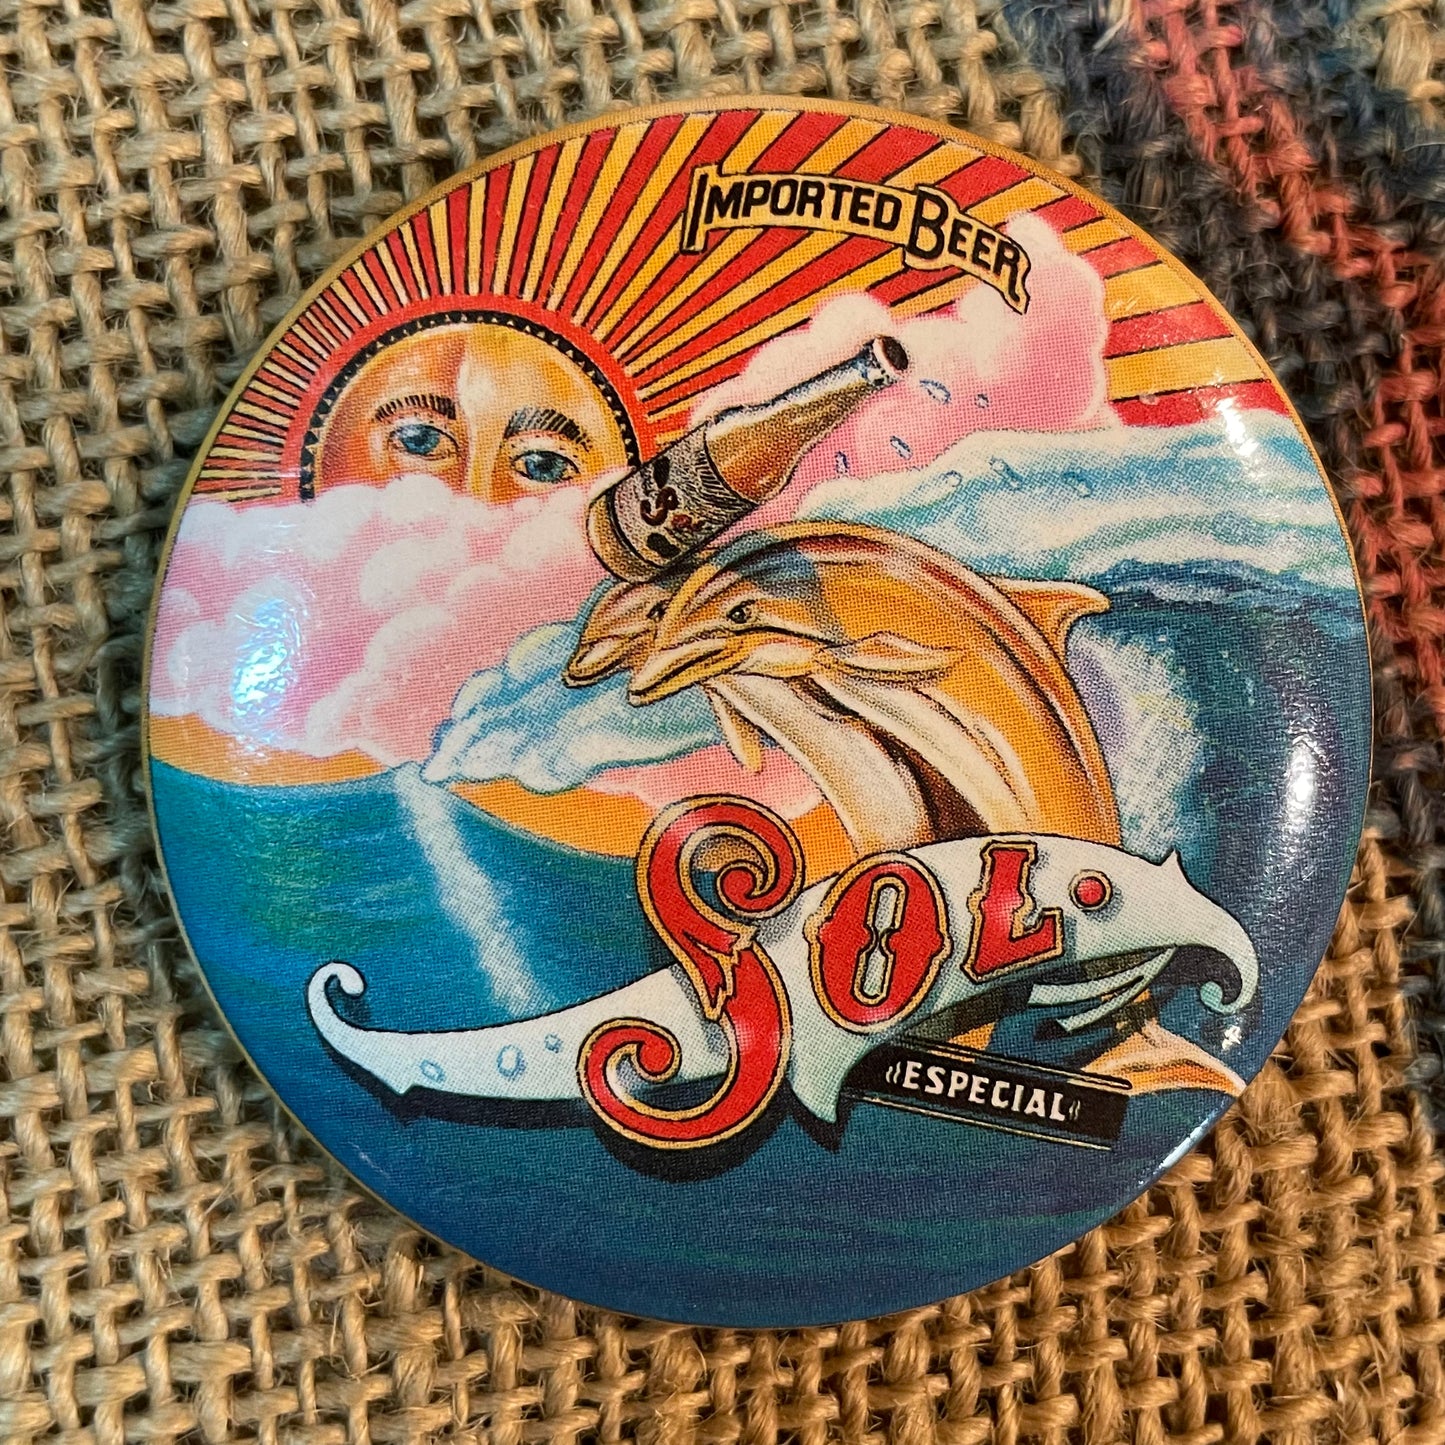 【USA vintage】缶バッジ　SOL Beer